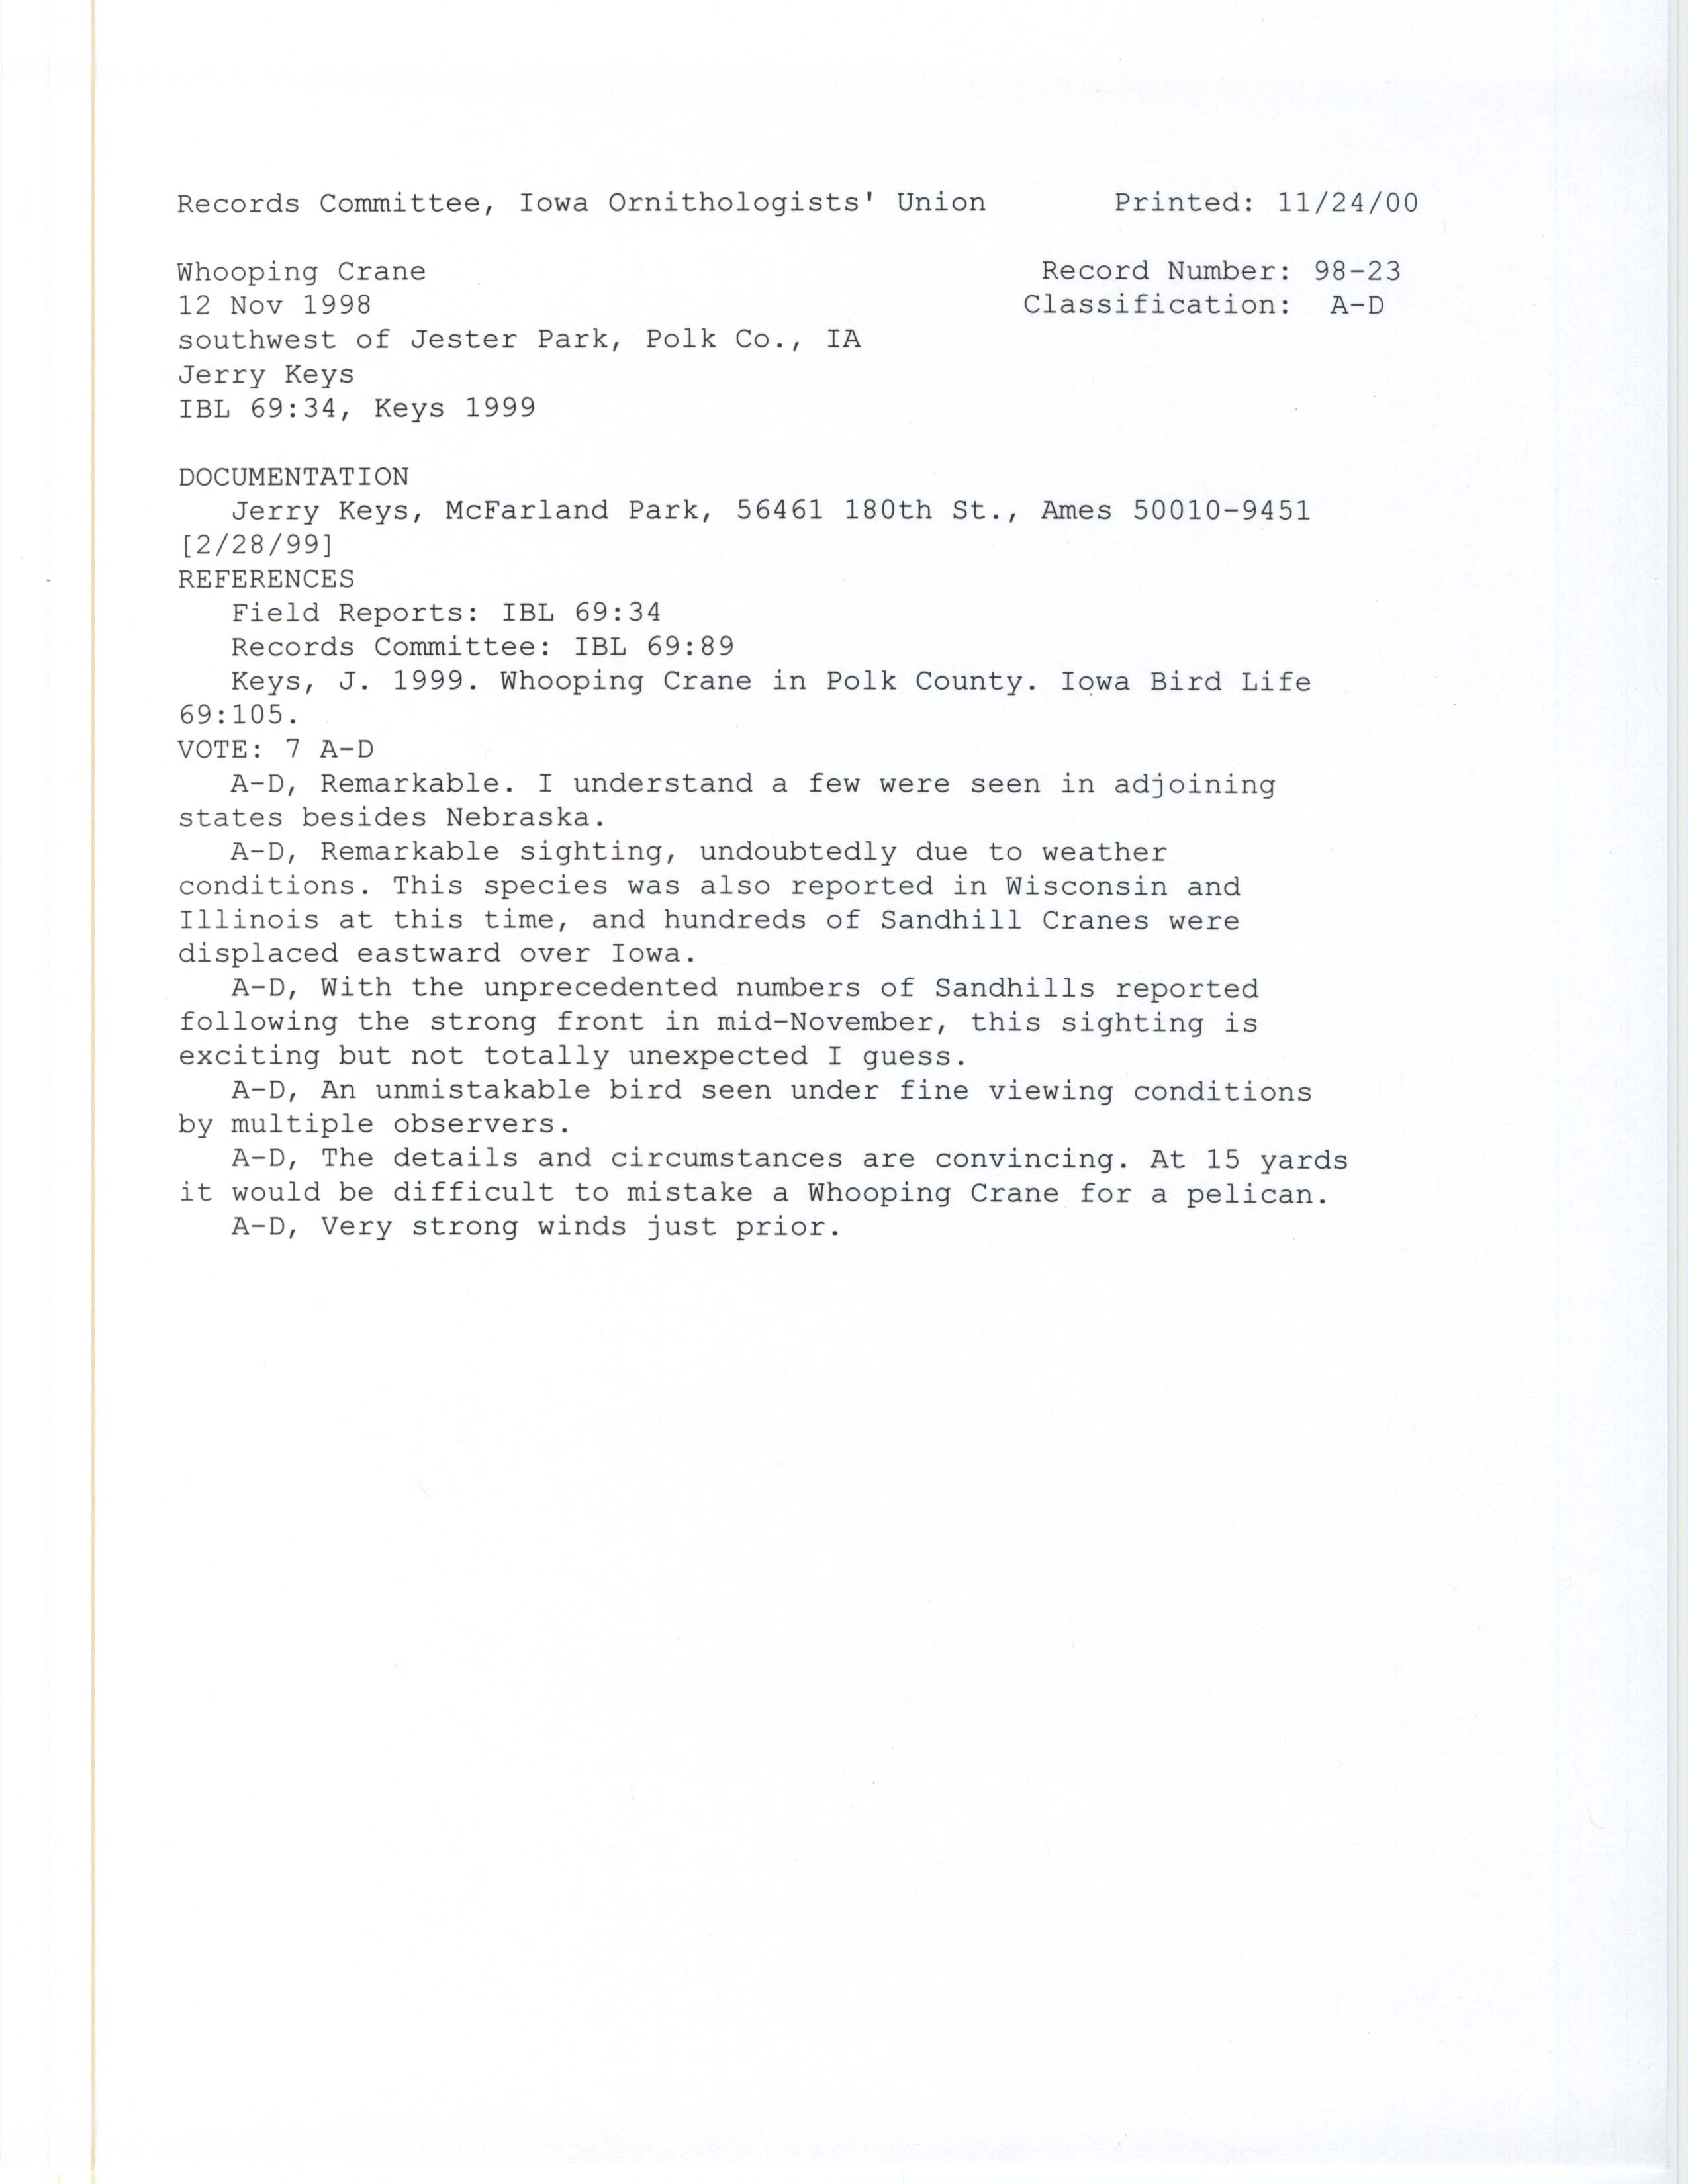 Records Committee review for rare bird sighting for Whooping Crane southwest of Jester Park, 1998